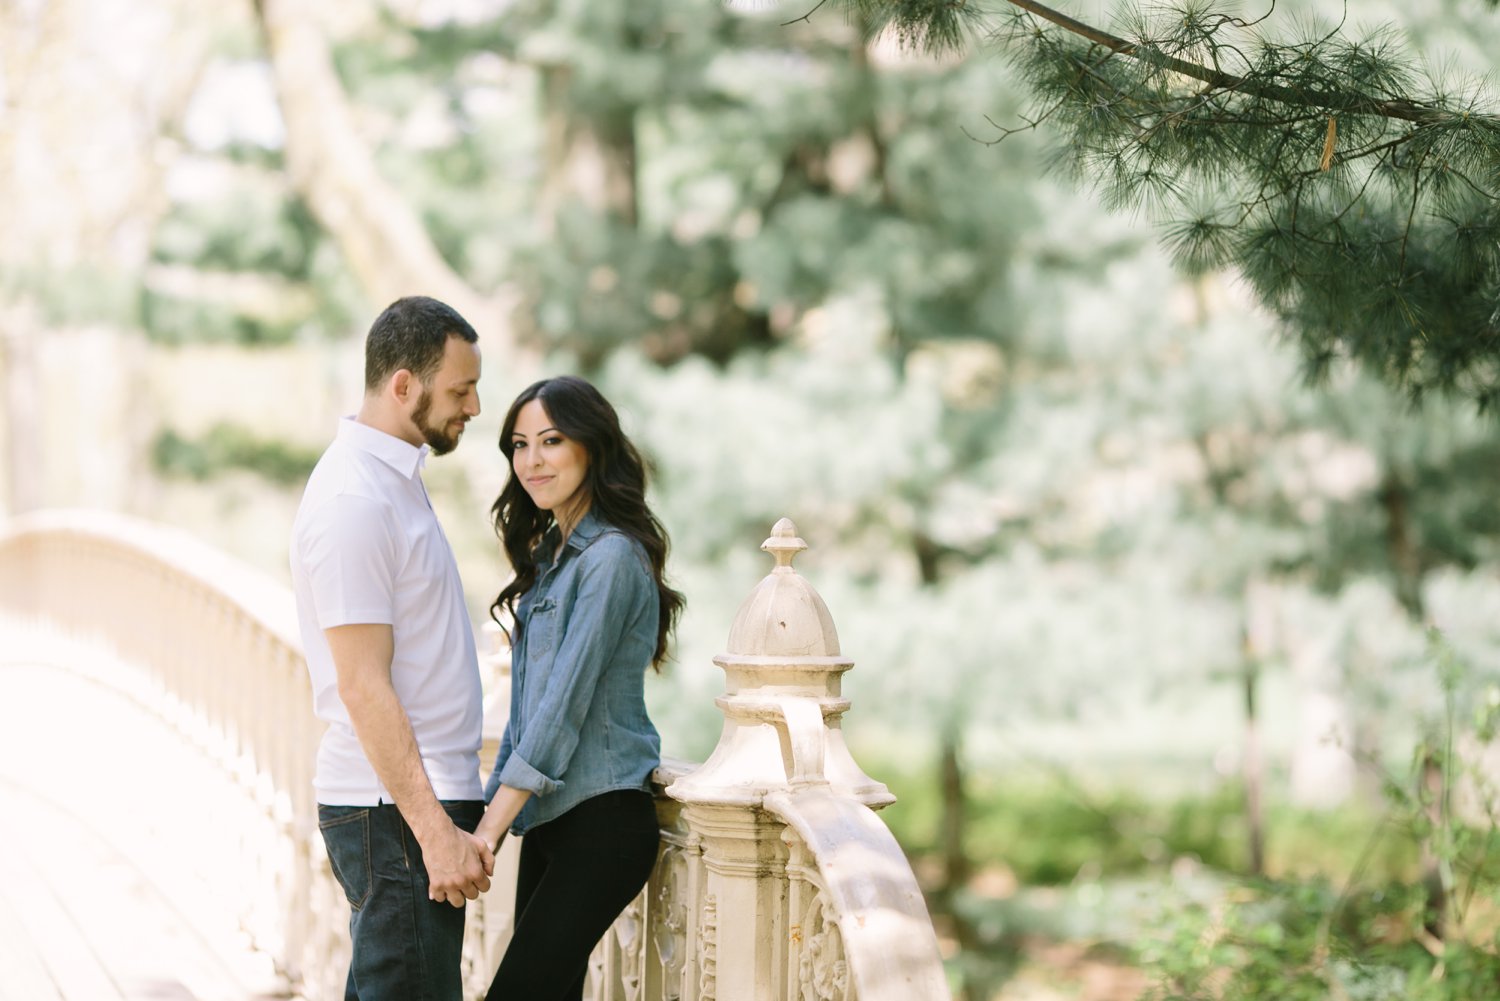 5NYC-NJ-ENGAGEMENT-PHOTOGRAPHY-BY-INTOTHESTORY-MOO-JAE.JPG